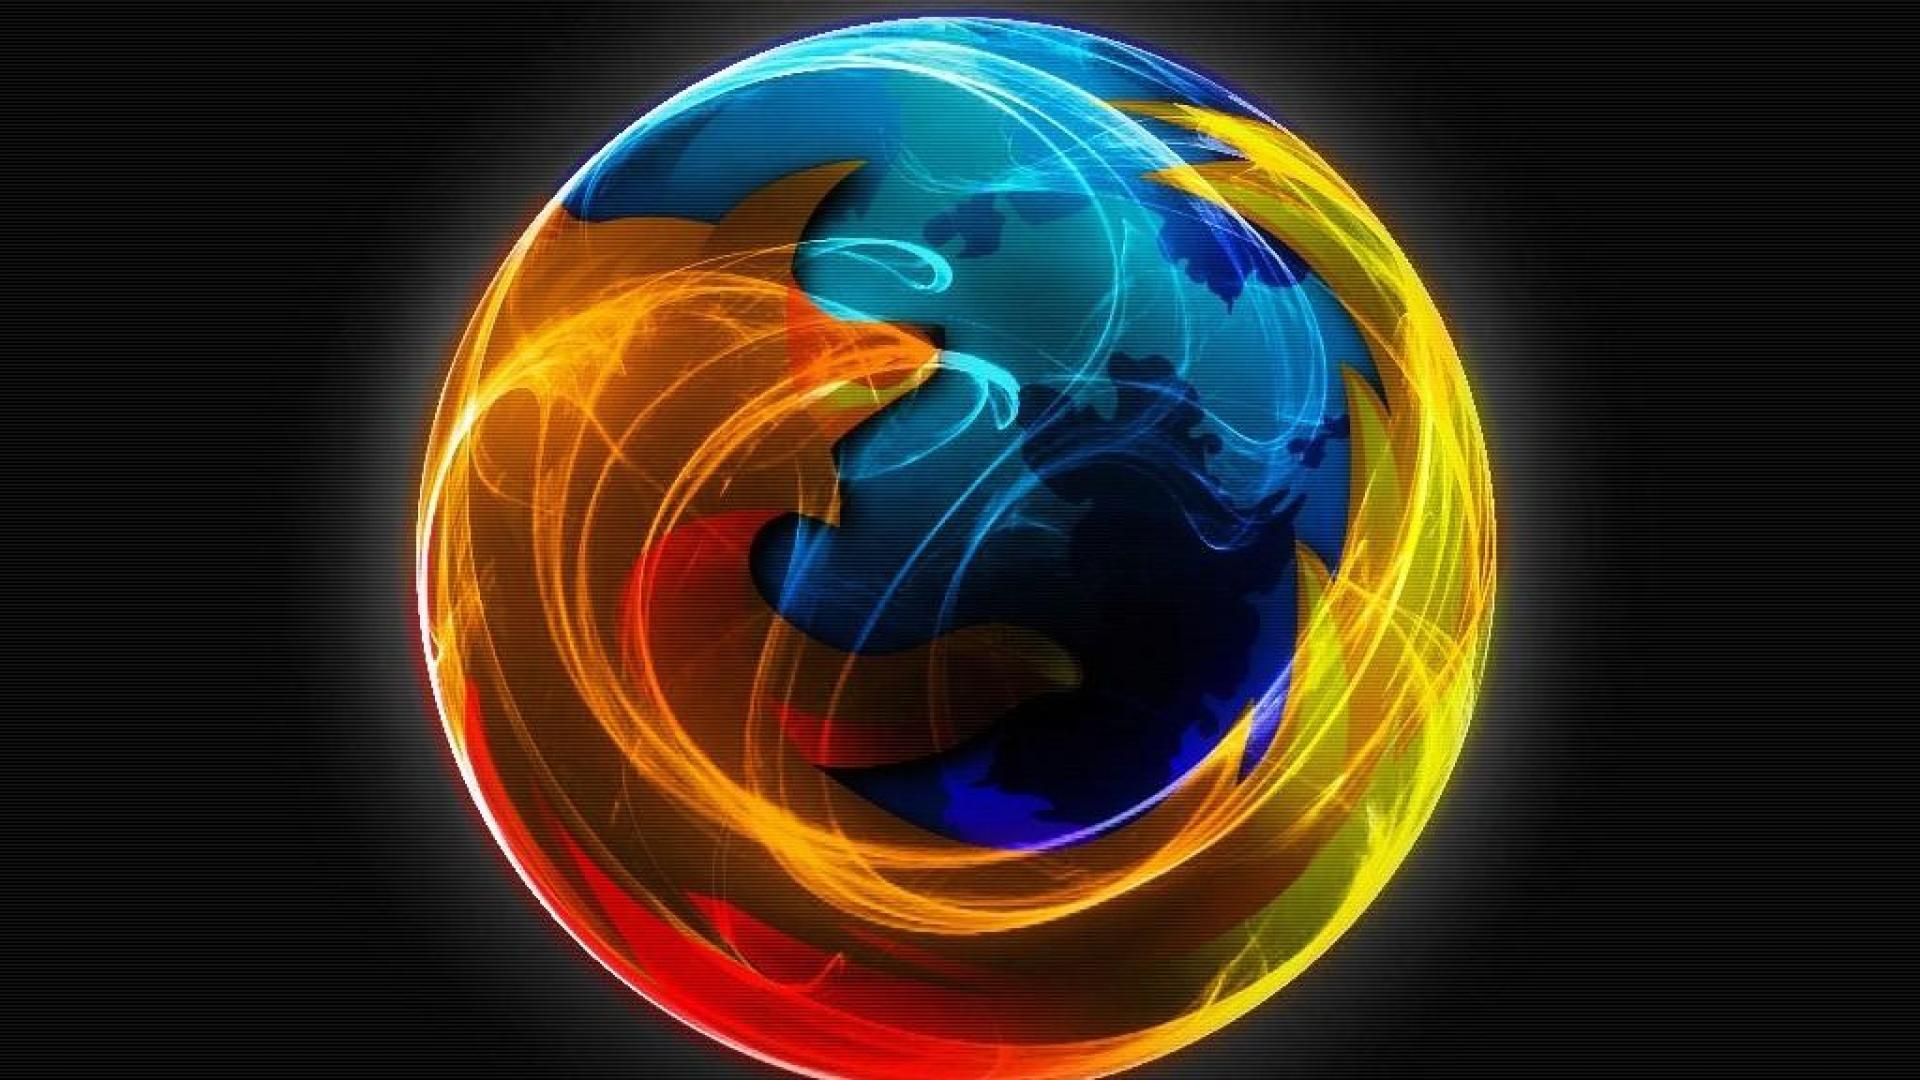 Firefox High Quality And Resolution Wallpaper On